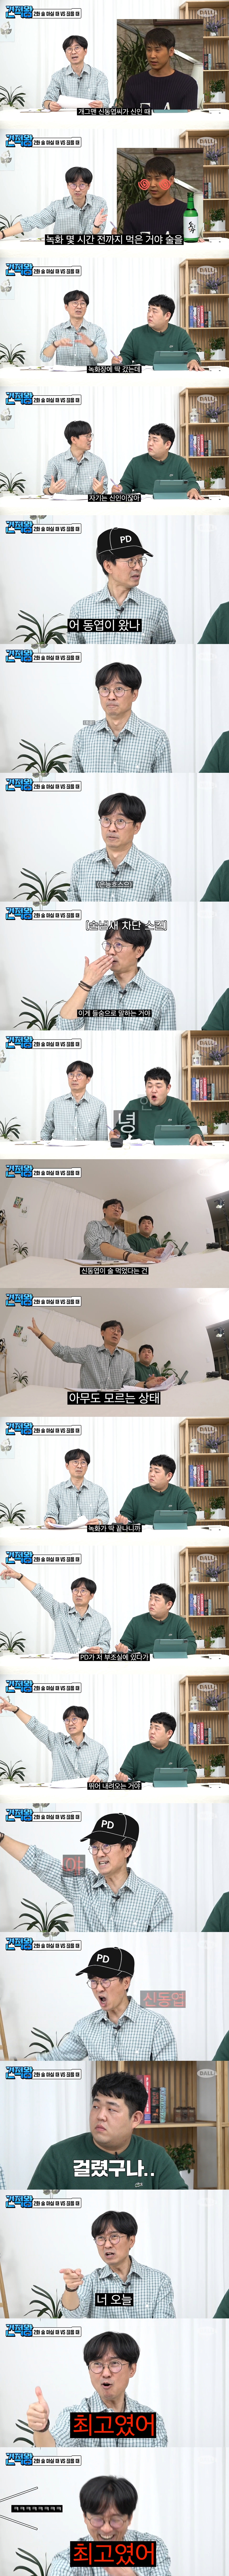 Shin Dong Yeop drank at the studio when he was a rookie.